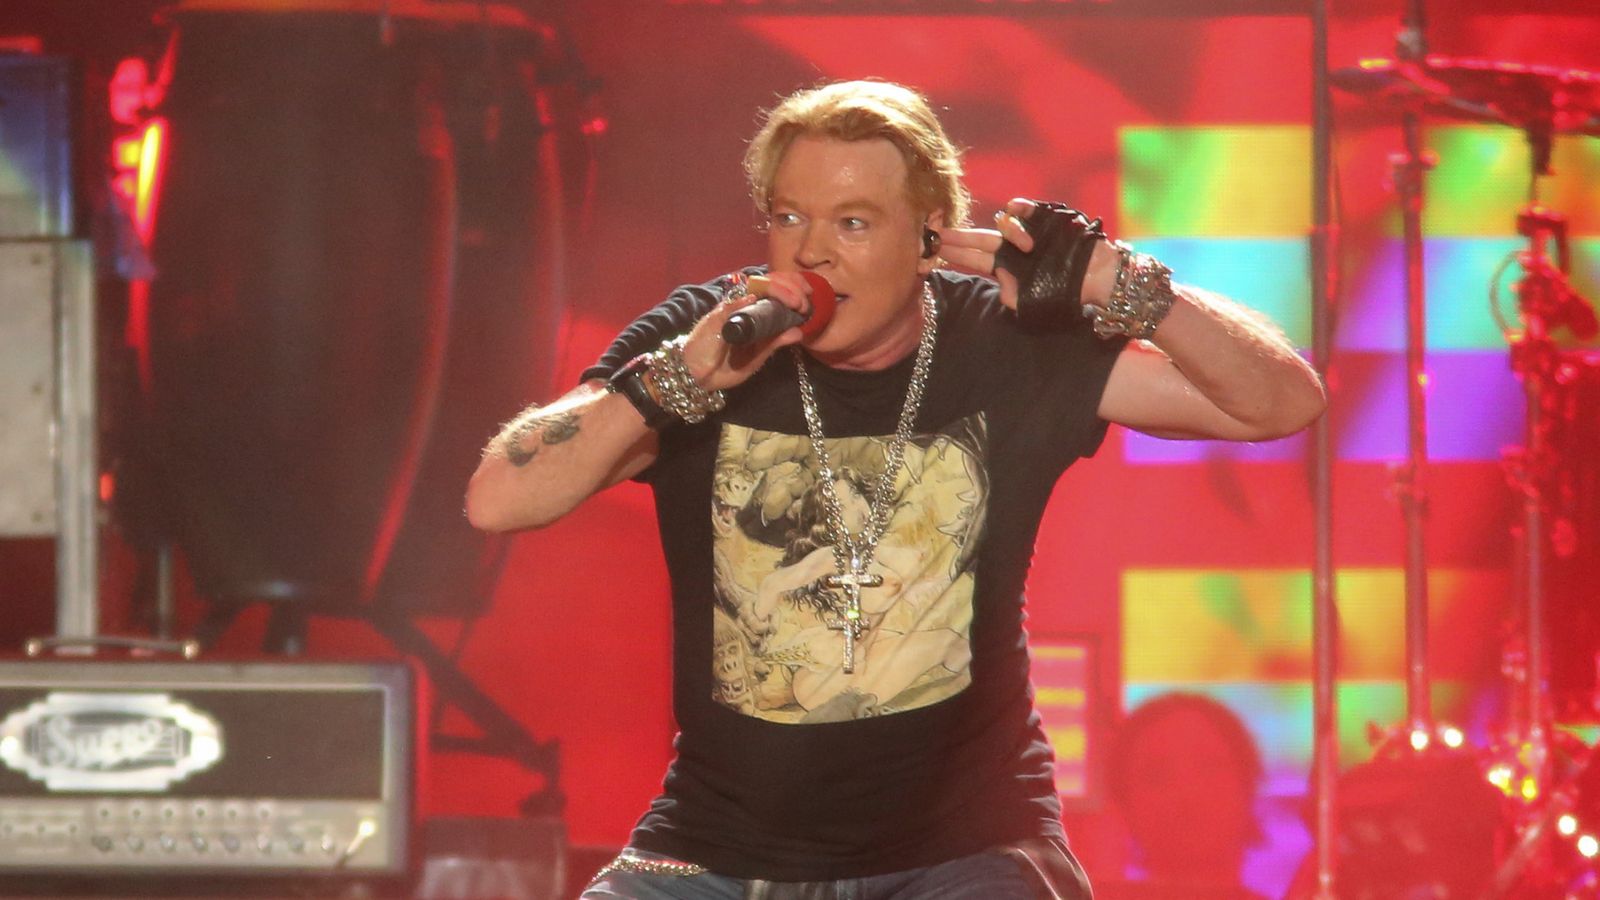 Guns N' Roses front man to stop trademark mic throw after fan hurt